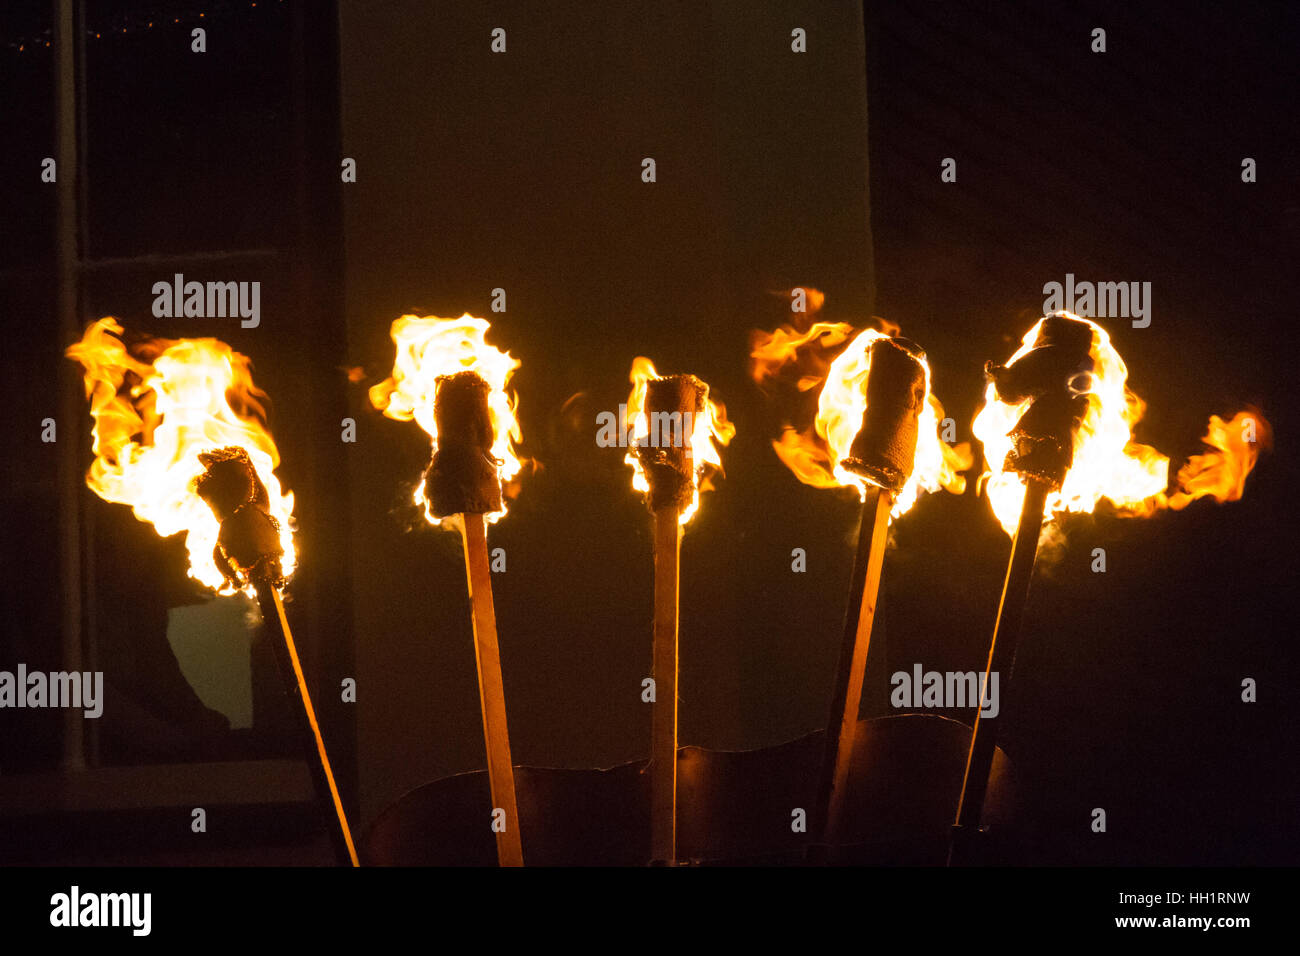 A photograph of 5 burning fire torches Stock Photo